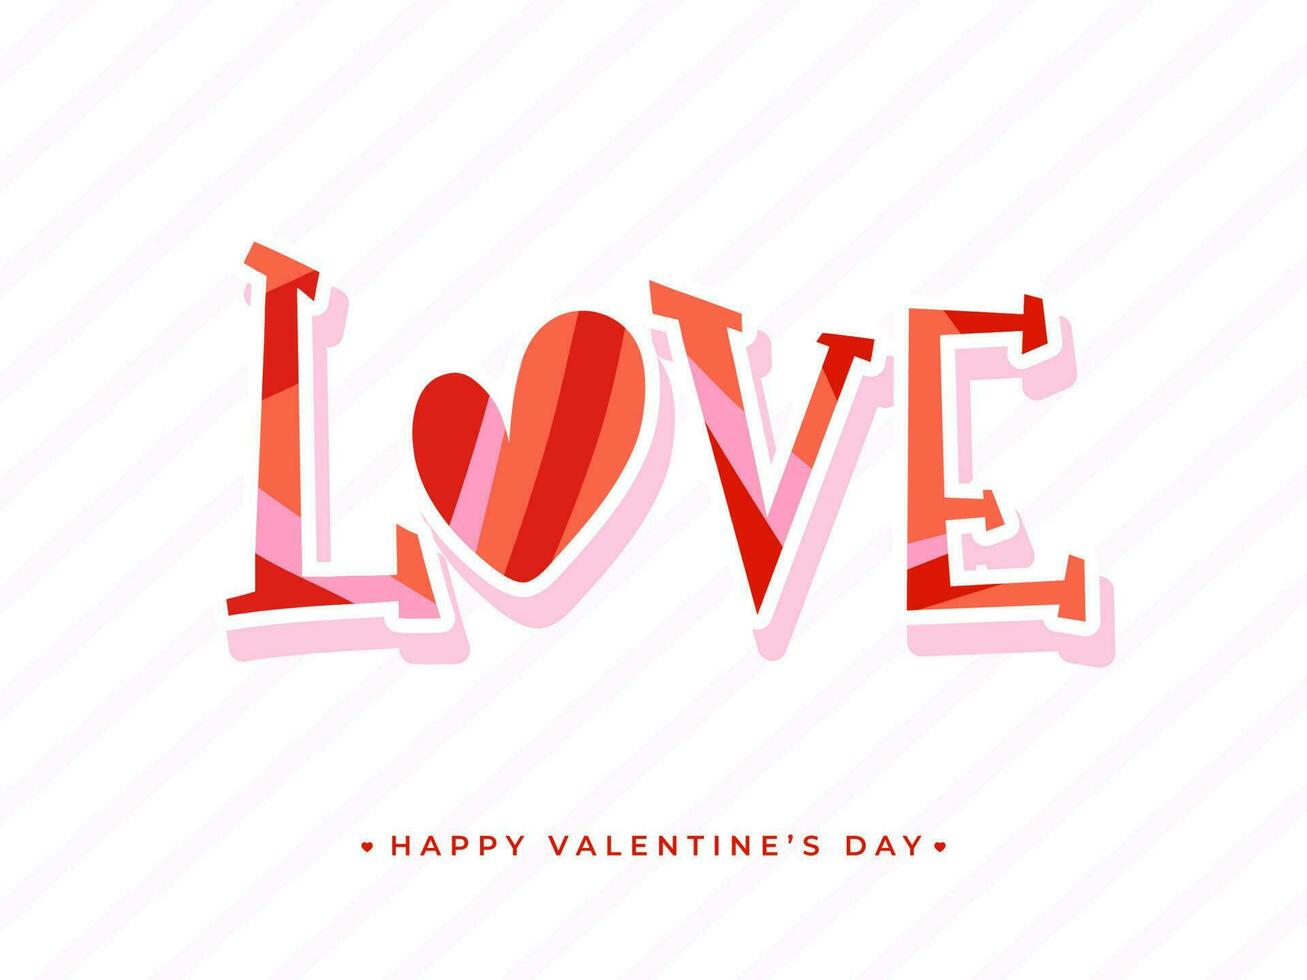 Sticker Style Love Text on White Striped Background for Happy Valentine's Day. vector